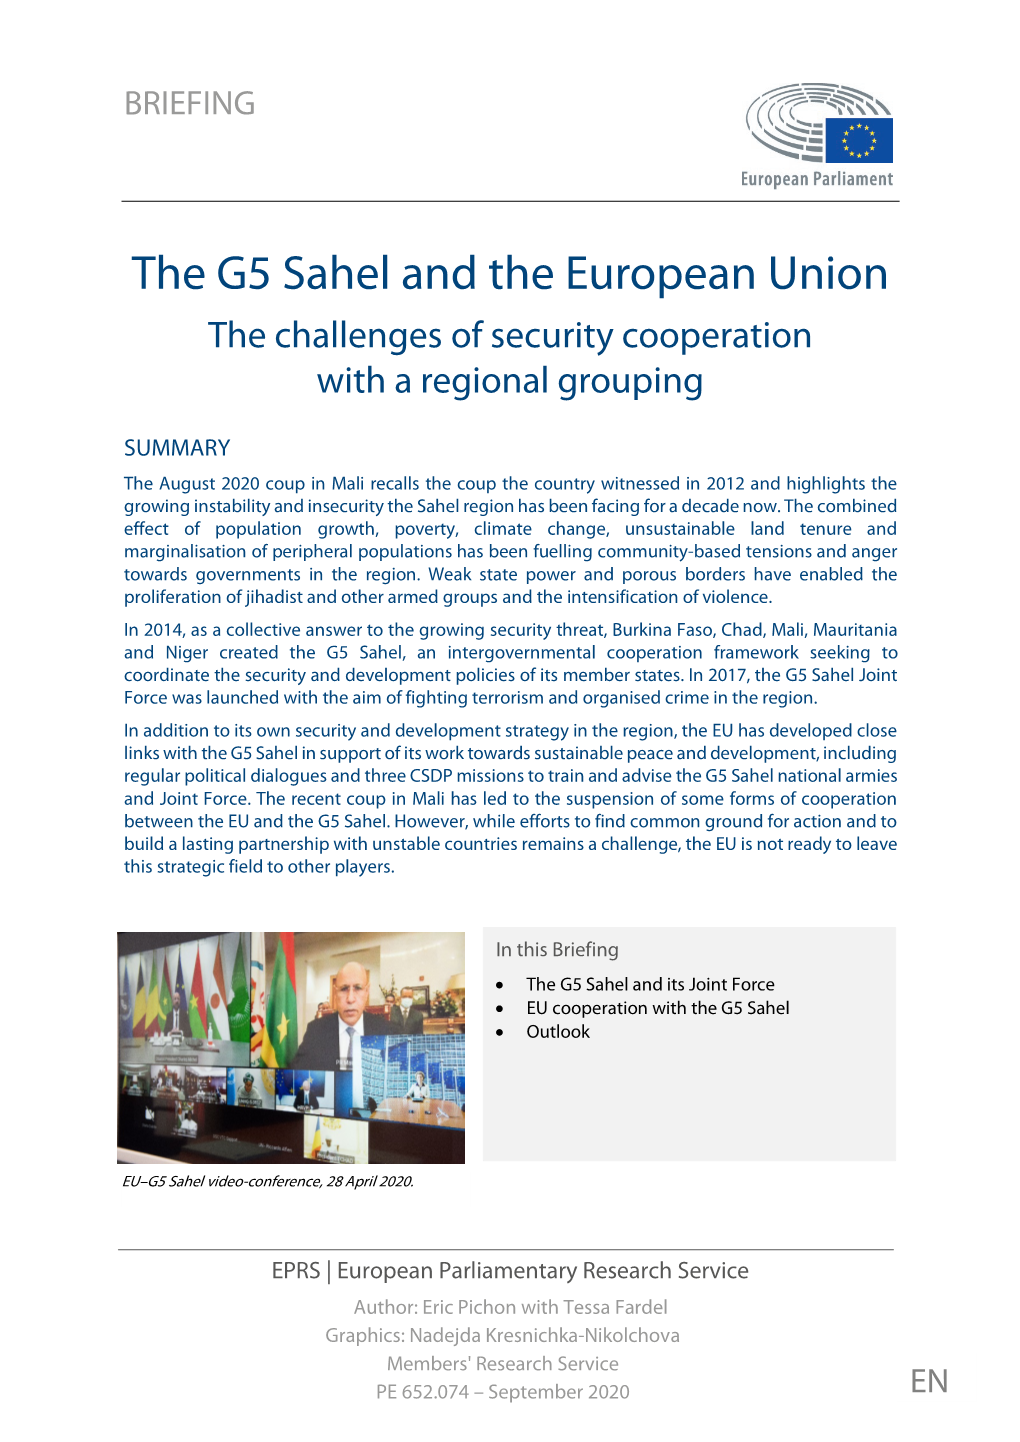 The G5 Sahel and the European Union the Challenges of Security Cooperation with a Regional Grouping